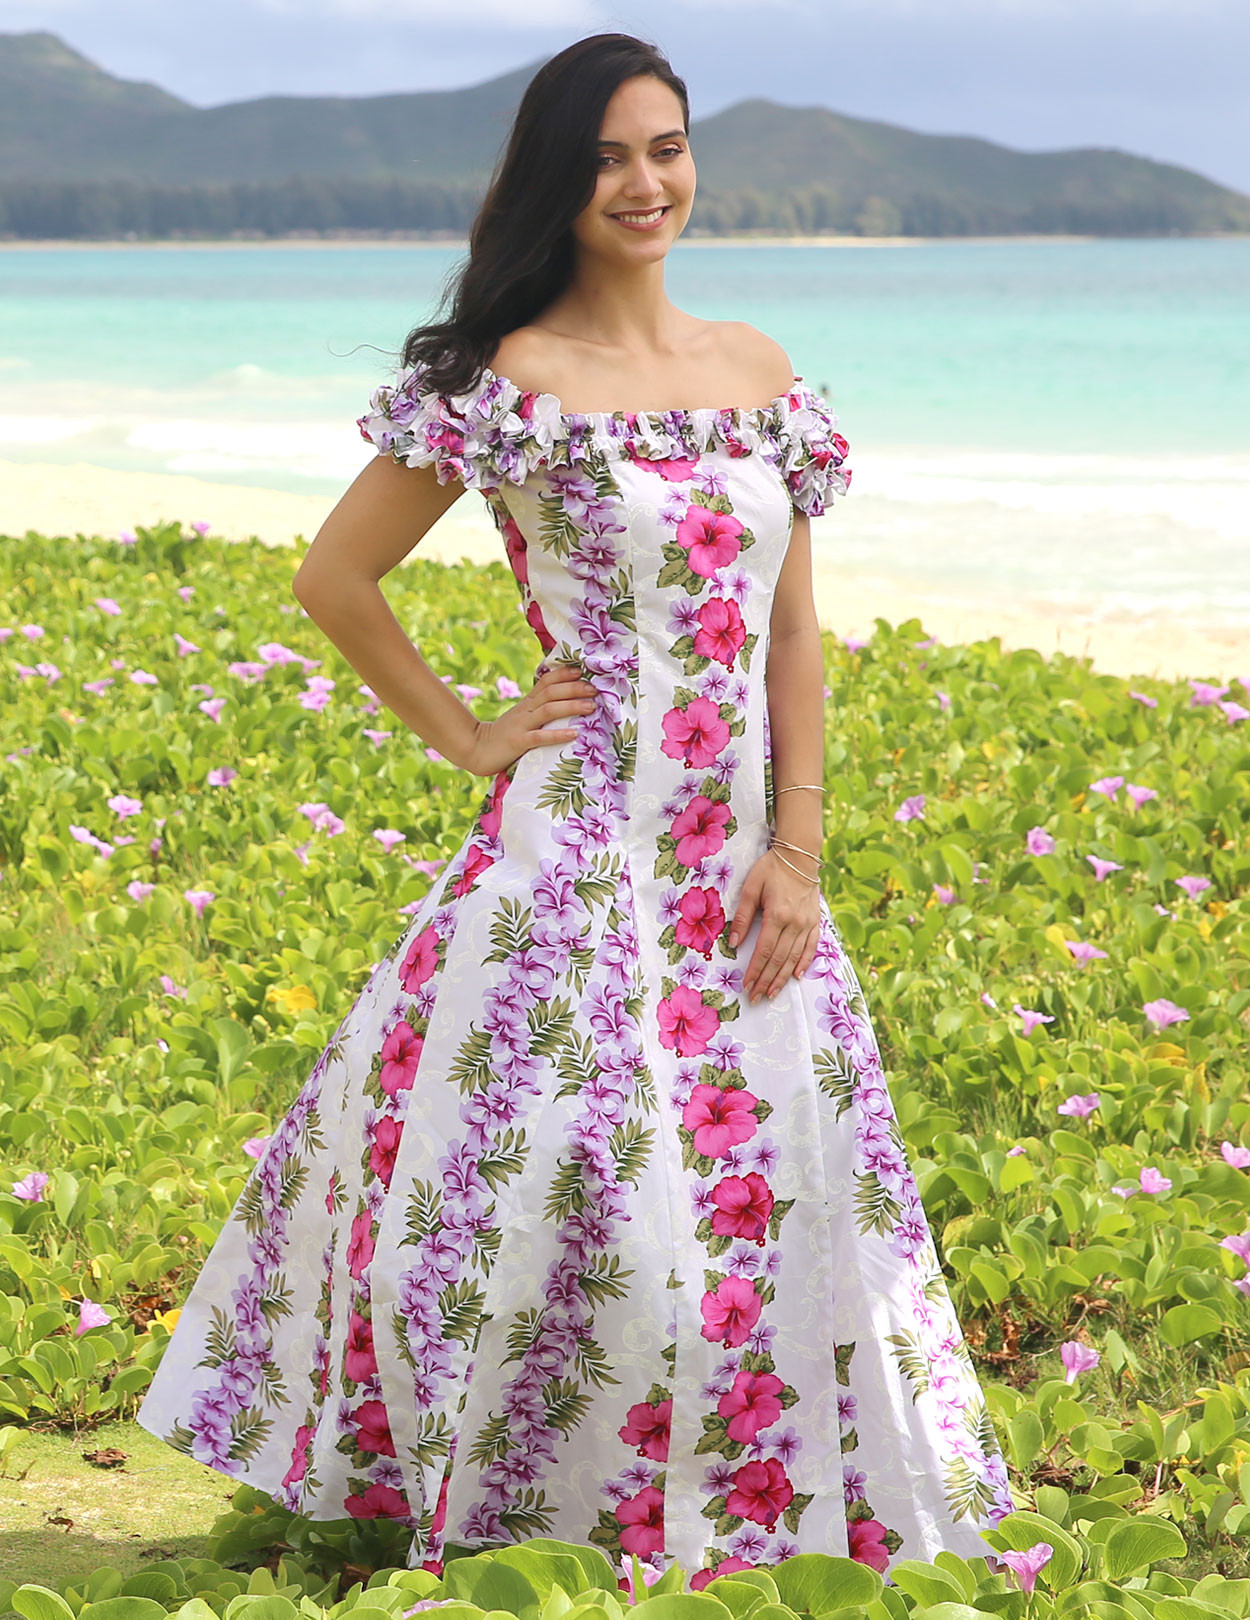 Best Hawaii Wedding Dress of the decade Learn more here 